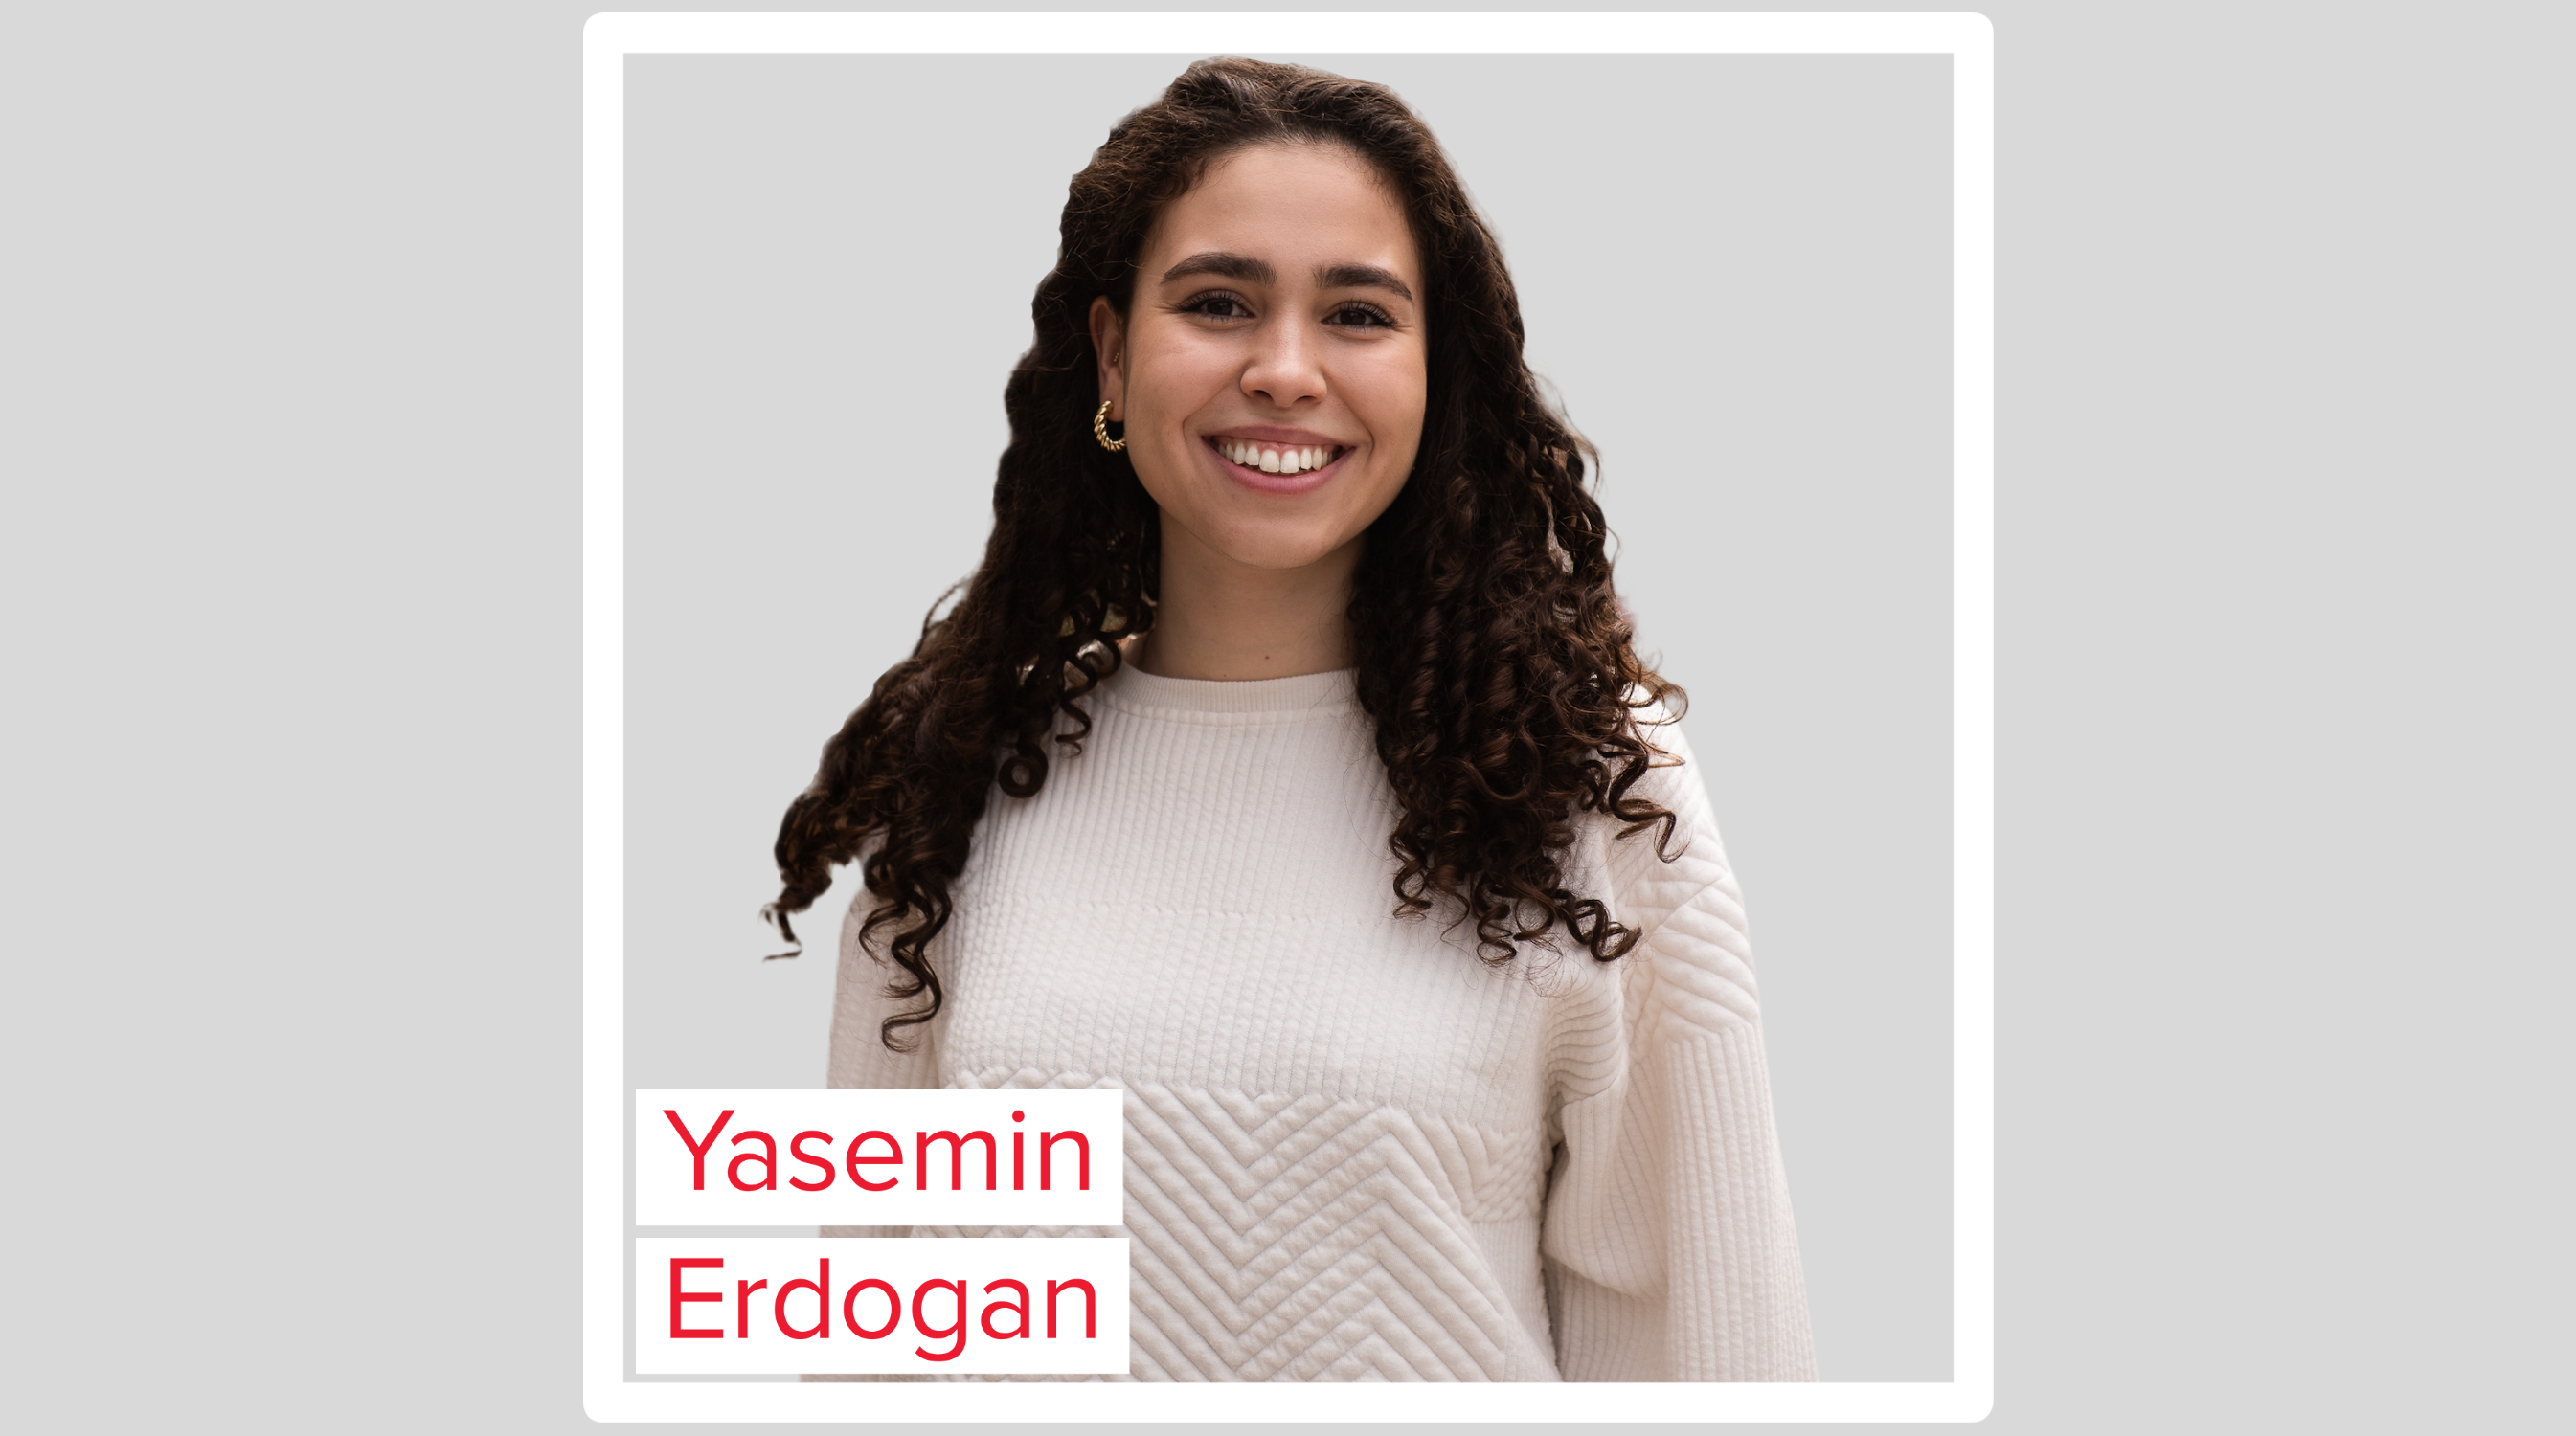 Yasemin Erdogan, student featured in the article